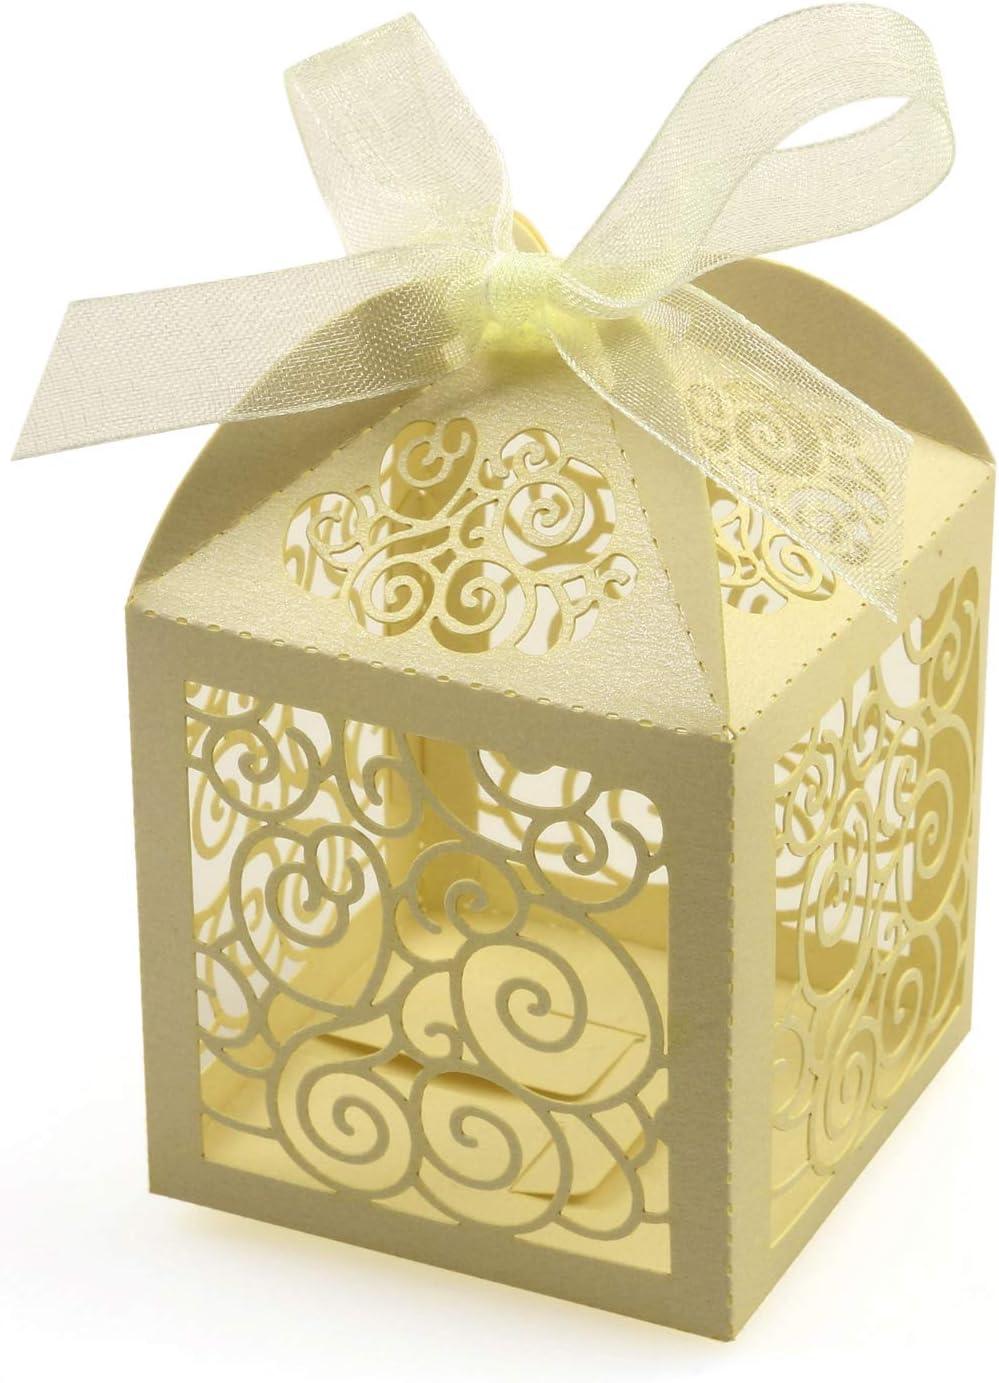 100 Pack Wedding Favor Boxes Laser Cut Boxes Party Favor Box Small Gift Boxes Lace Candy Boxes for Wedding Bridal Shower Baby Shower Birthday Party - Lasercutwraps Shop